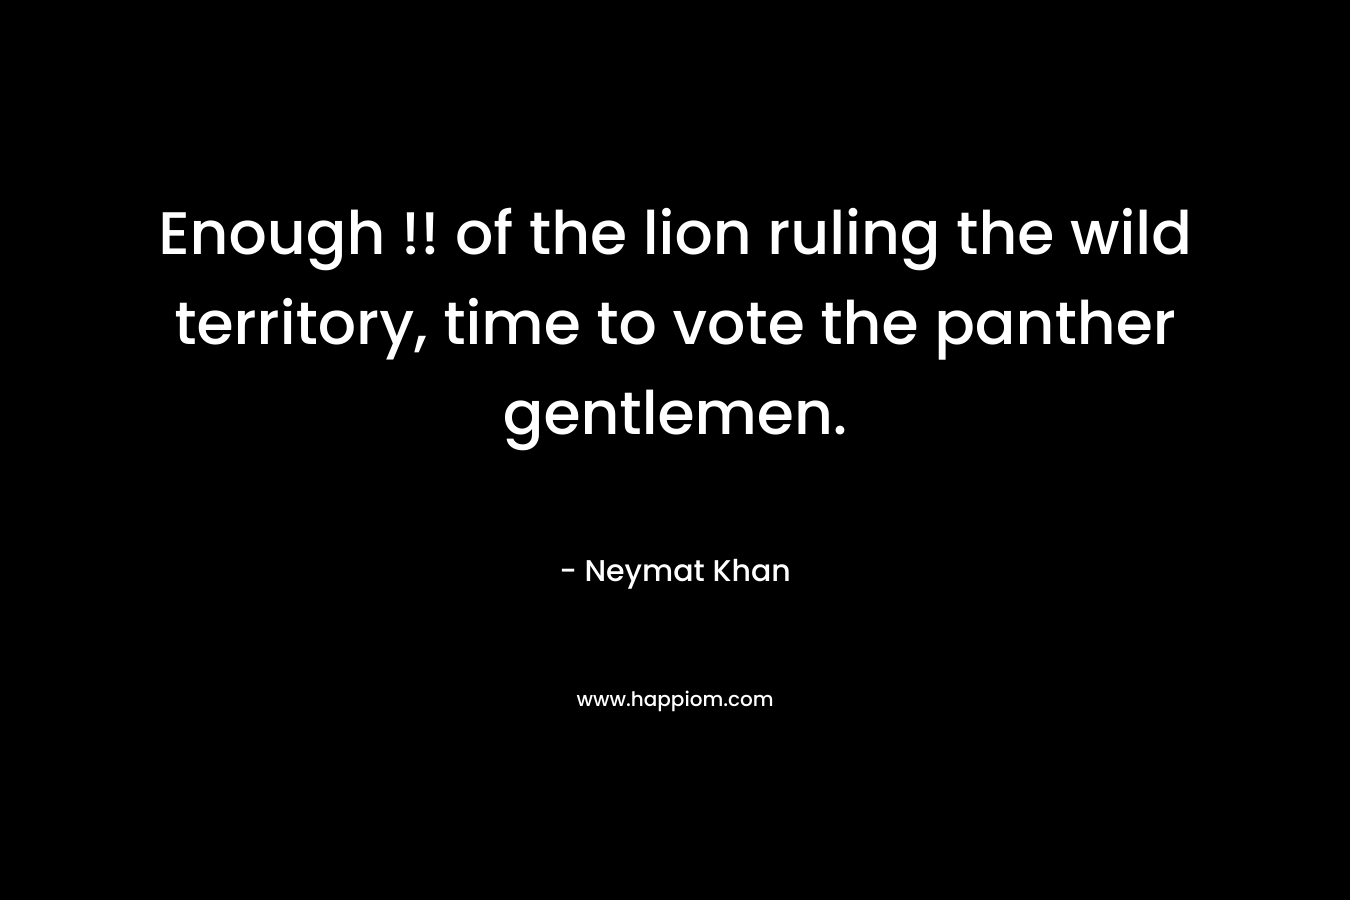 Enough !! of the lion ruling the wild territory, time to vote the panther gentlemen. – Neymat Khan